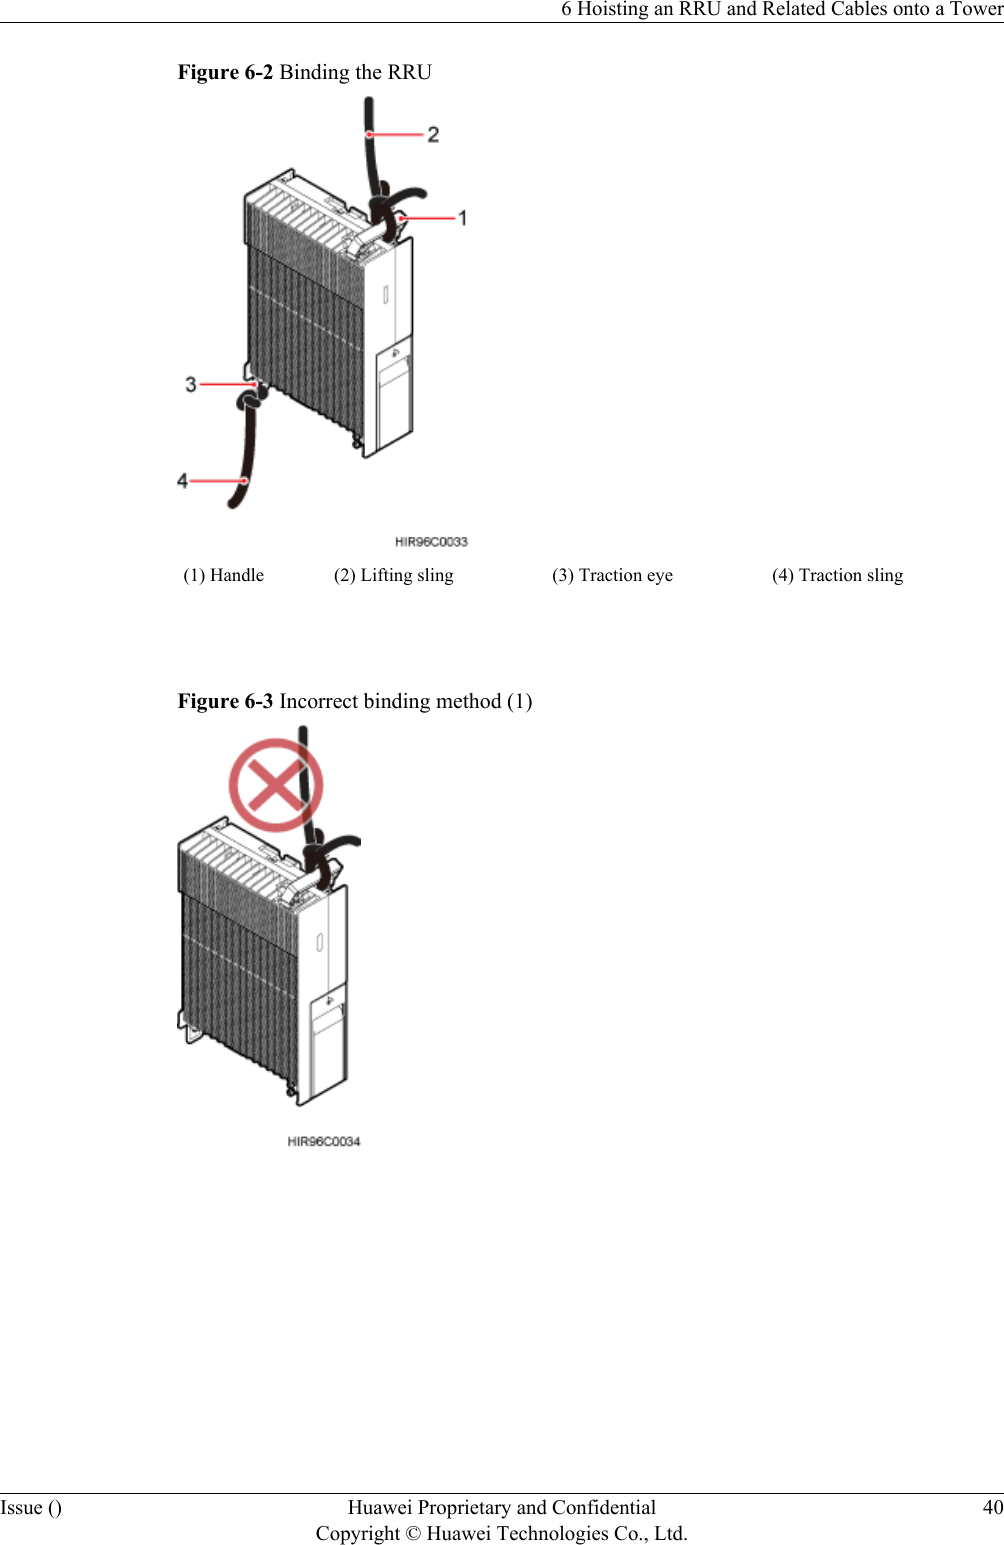 Figure 6-2 Binding the RRU(1) Handle (2) Lifting sling (3) Traction eye (4) Traction sling Figure 6-3 Incorrect binding method (1) 6 Hoisting an RRU and Related Cables onto a TowerIssue () Huawei Proprietary and ConfidentialCopyright © Huawei Technologies Co., Ltd.40